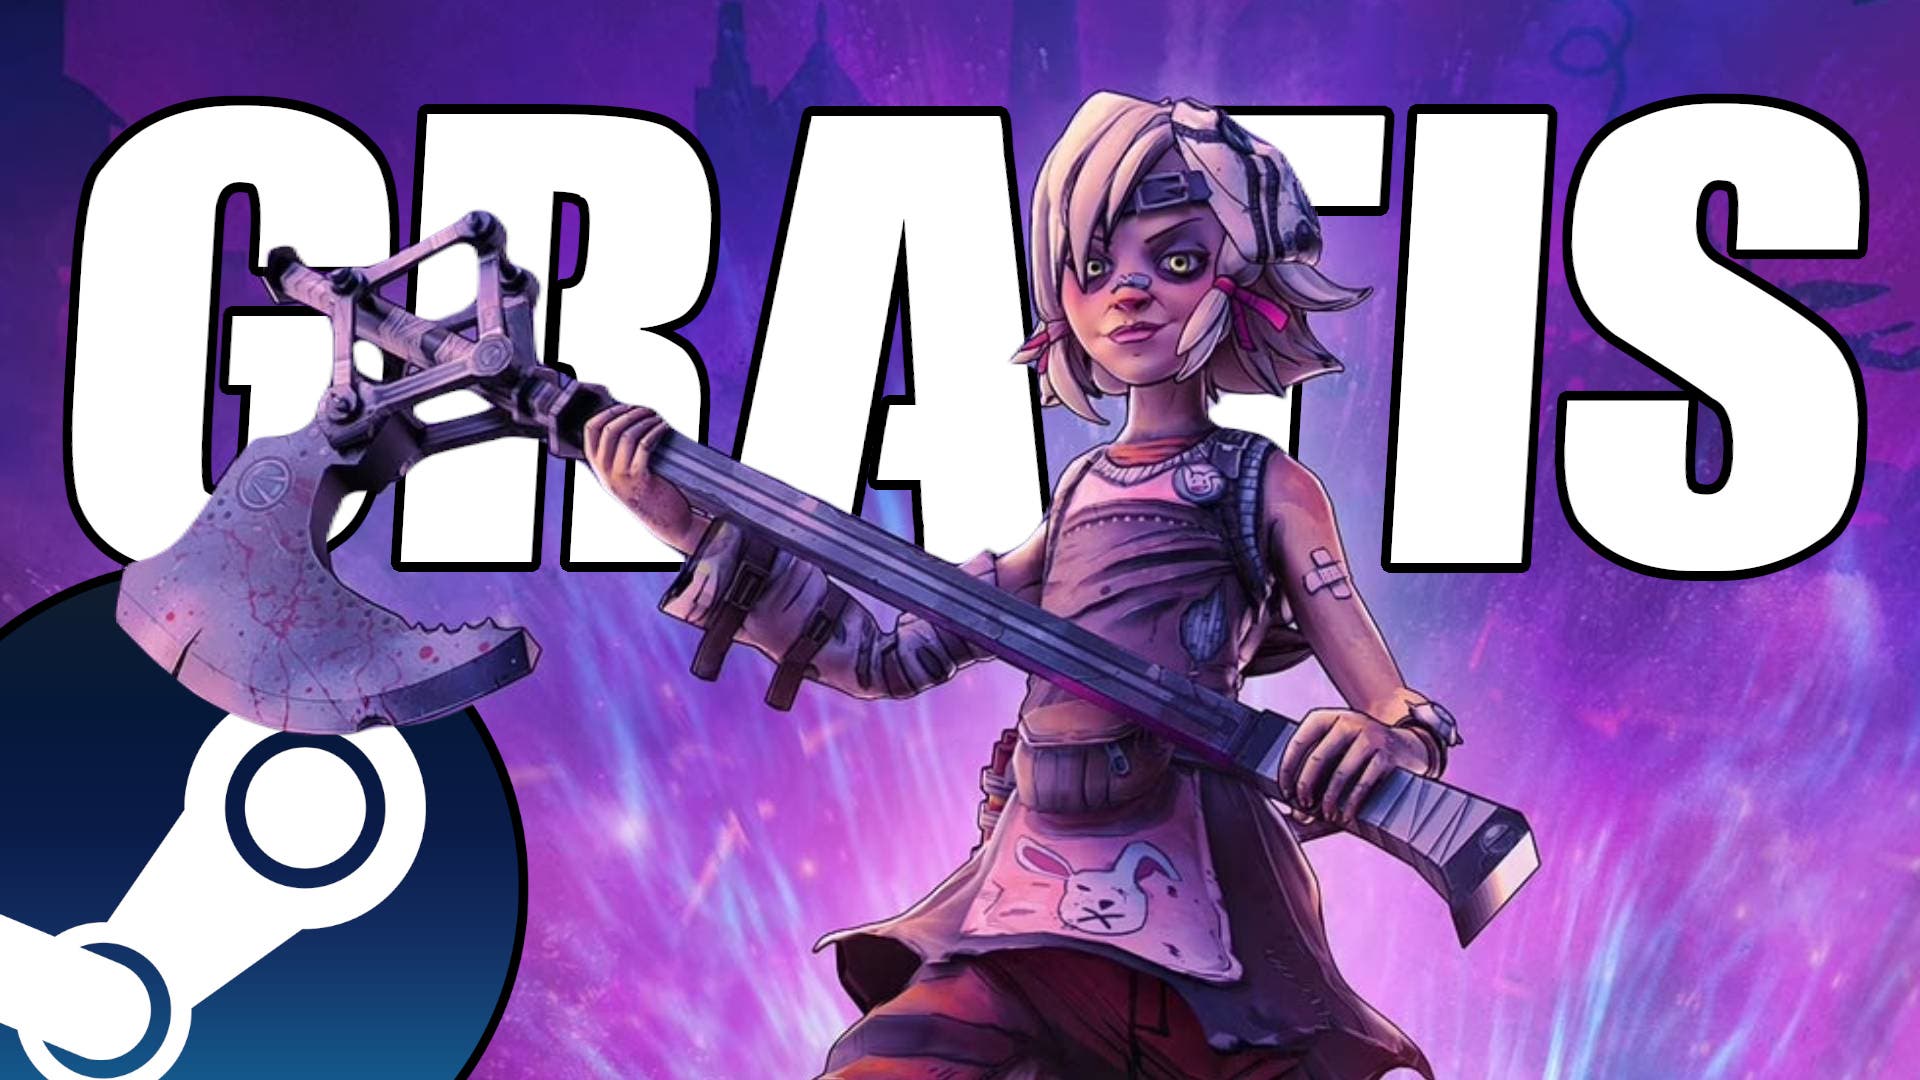 Get this game from the Borderlands saga for free on Steam and keep it forever